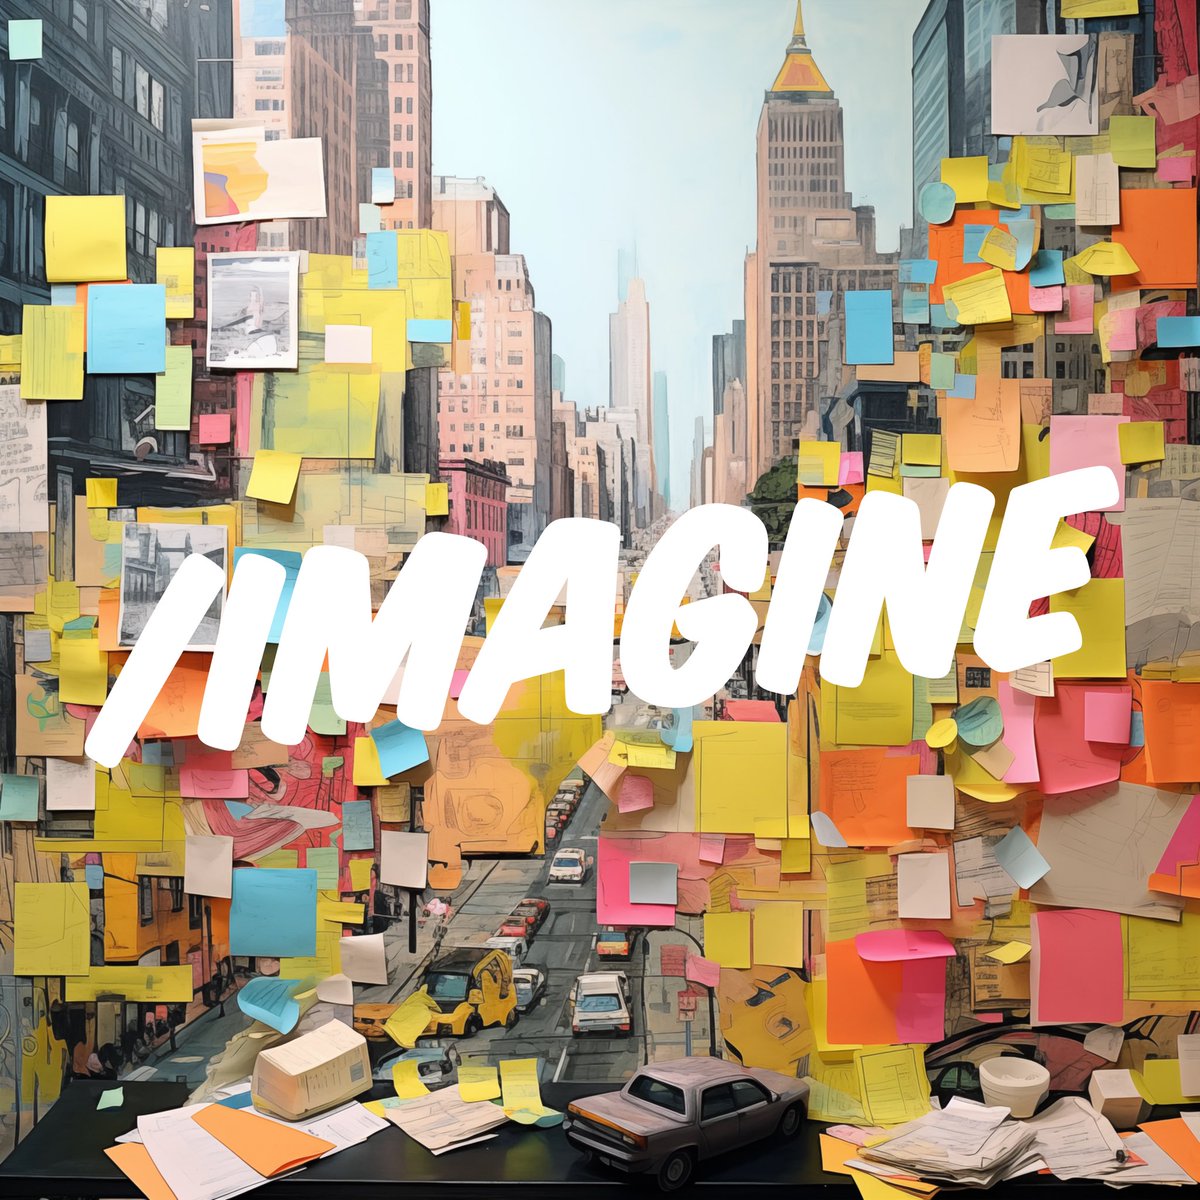 Imagine a new day. New possibilities. A new world. What would you /imagine?